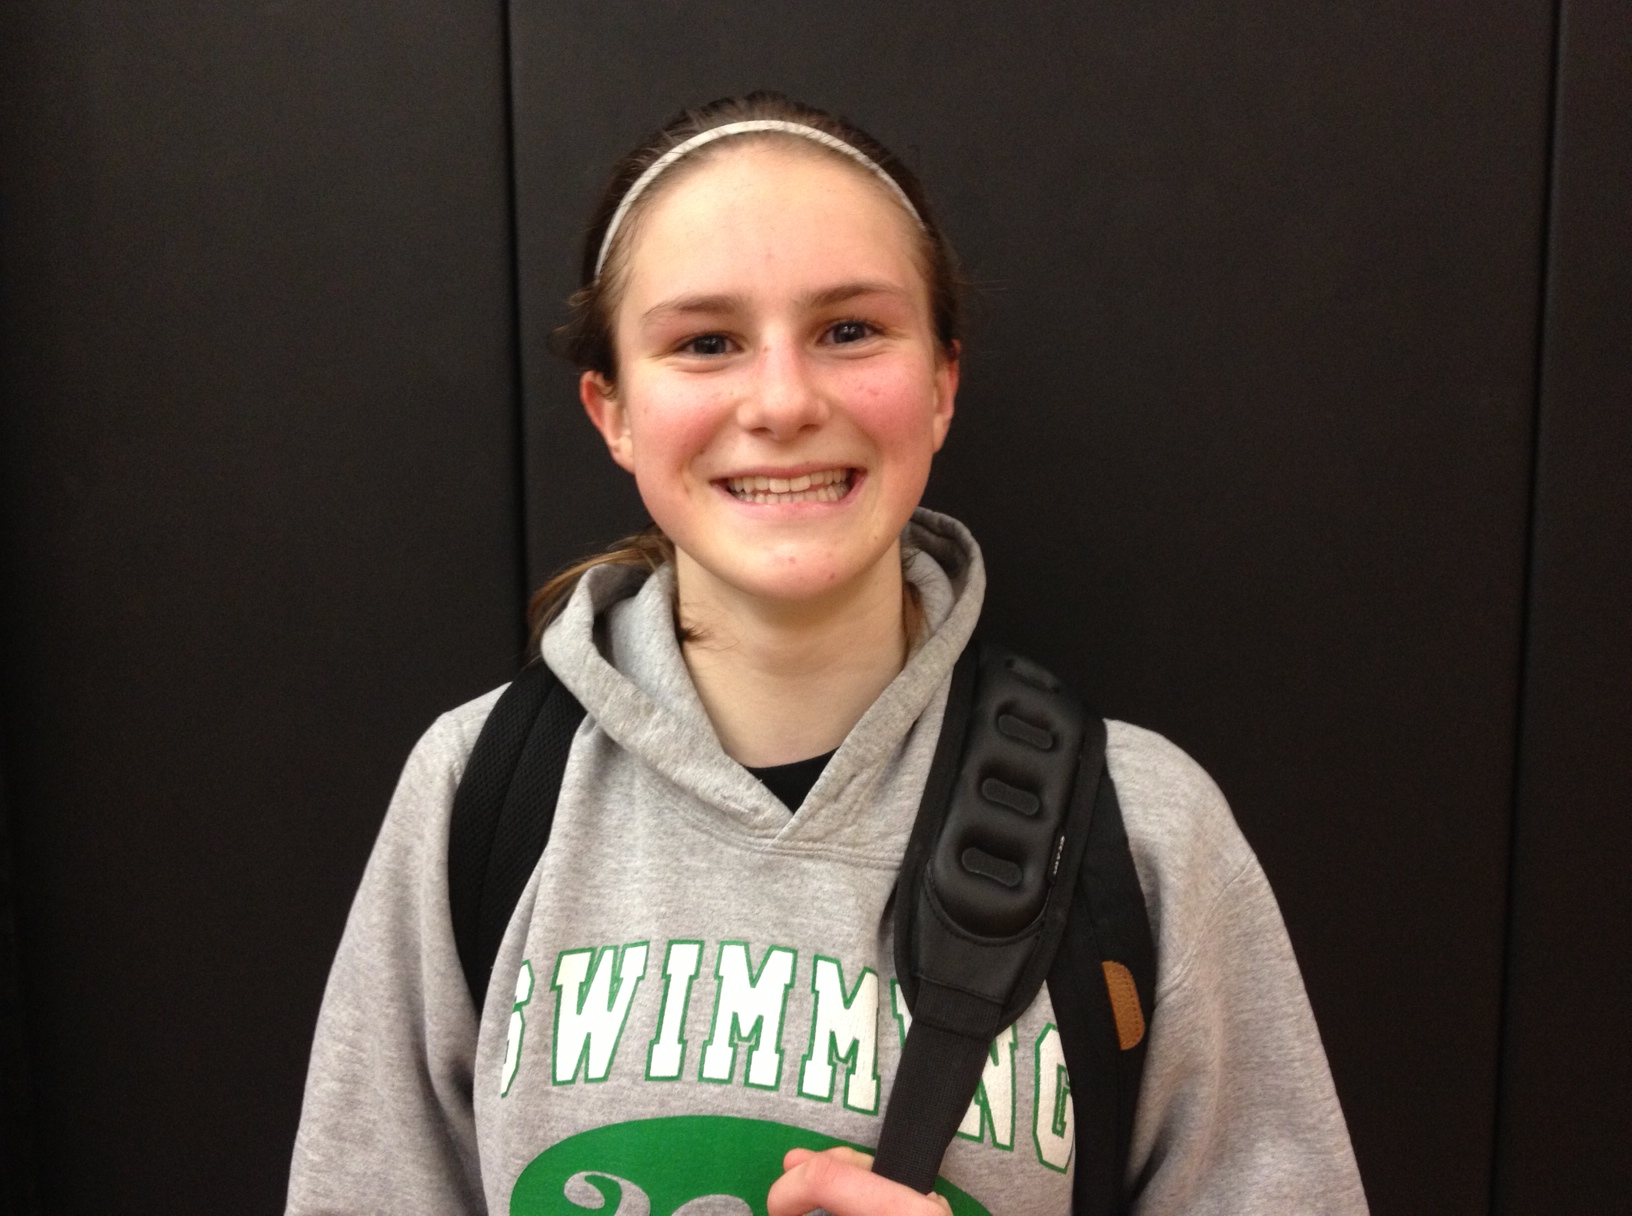 Freshman Kat Tudor hit for 19 points to lead St. Mary's of Stockton when the Rams defeated Miramonte of Orinda 63-62 in the opening round of the CIF Northern California open division playoffs.